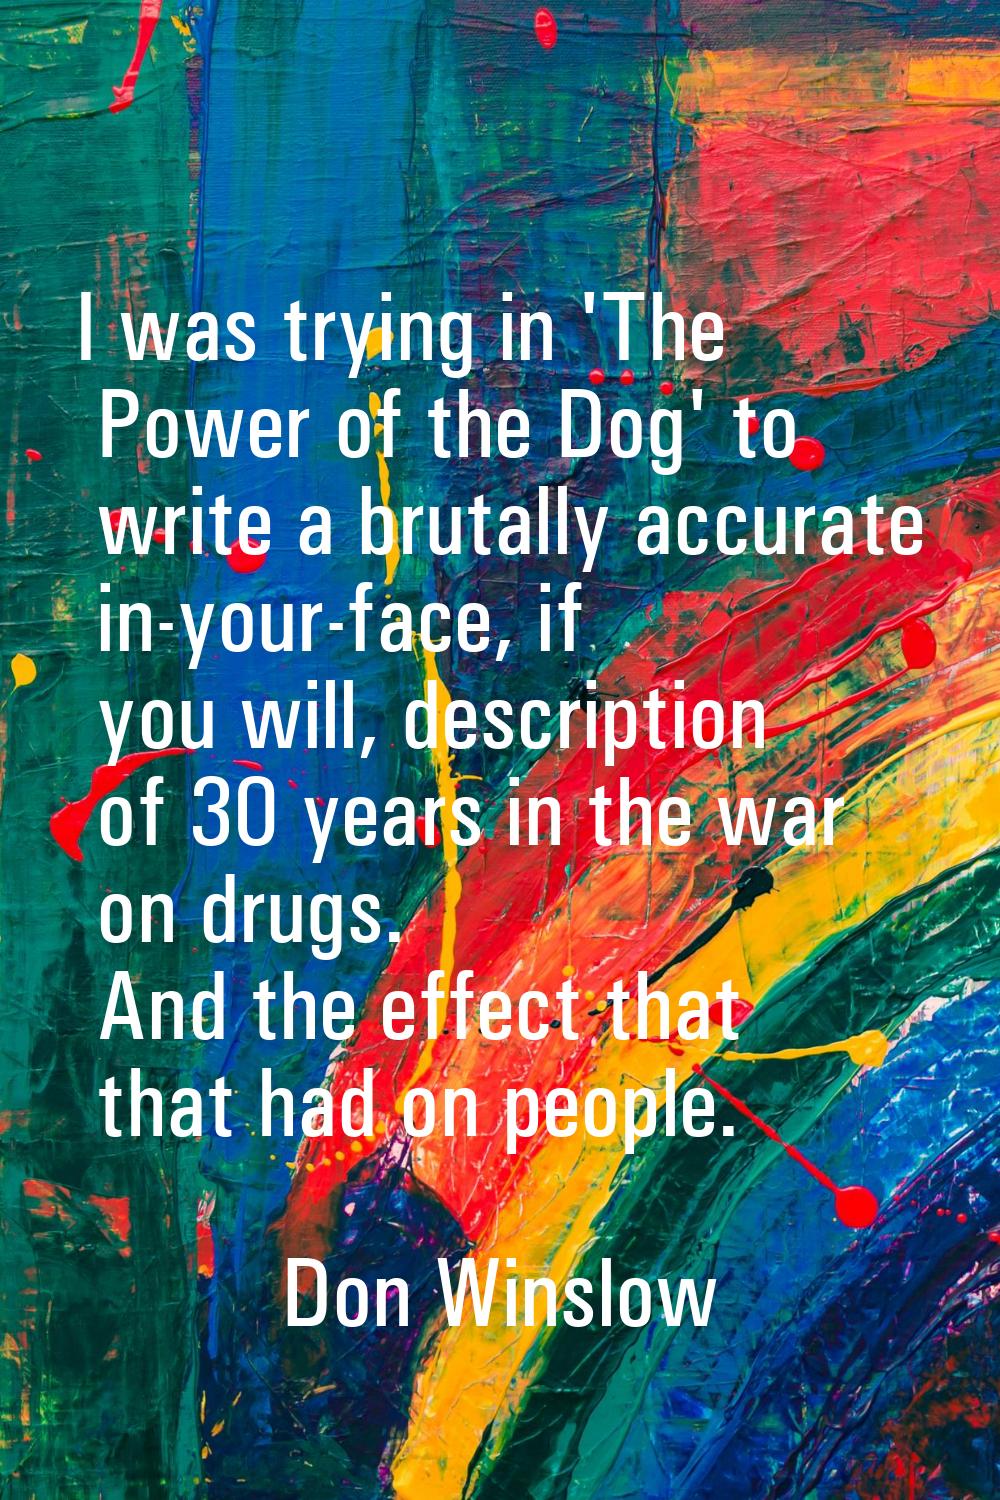 I was trying in 'The Power of the Dog' to write a brutally accurate in-your-face, if you will, desc